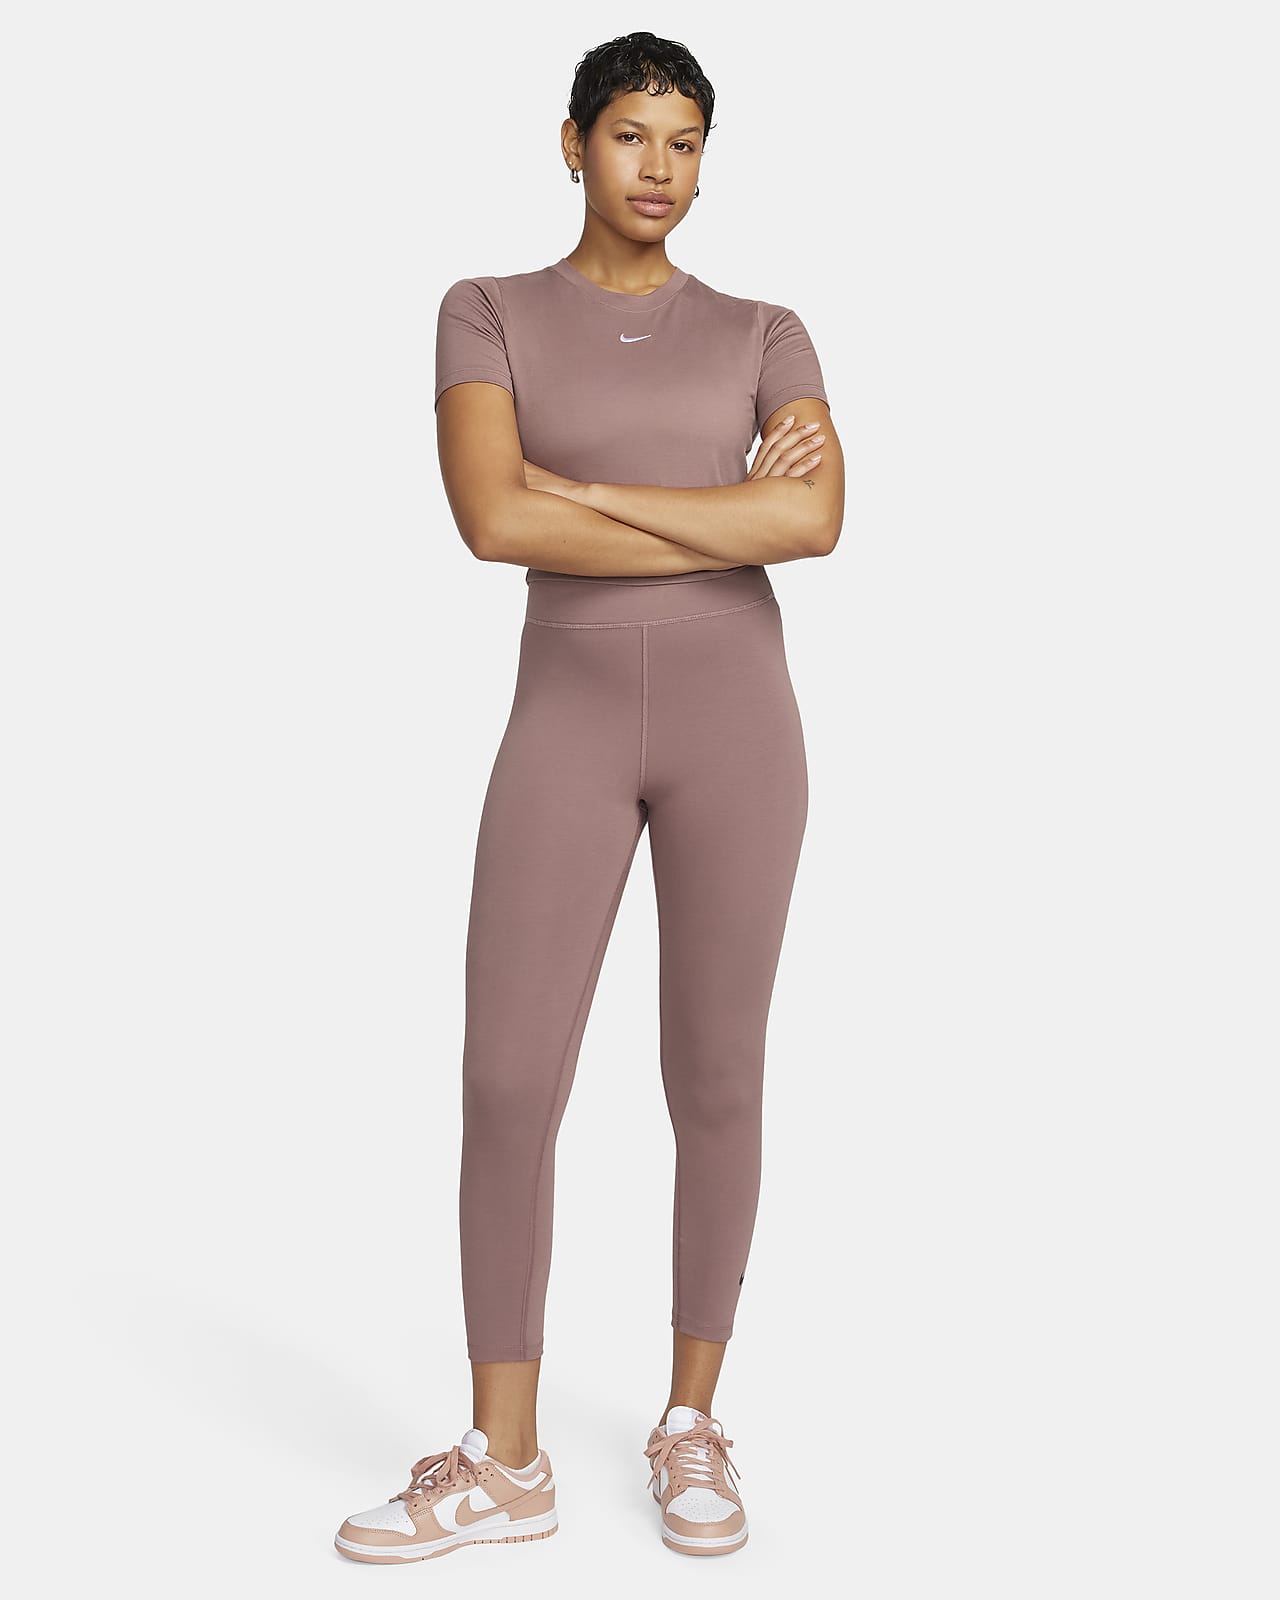 Nike Yoga Dri-FIT Luxe high-waisted 7/8 colorblock leggings in